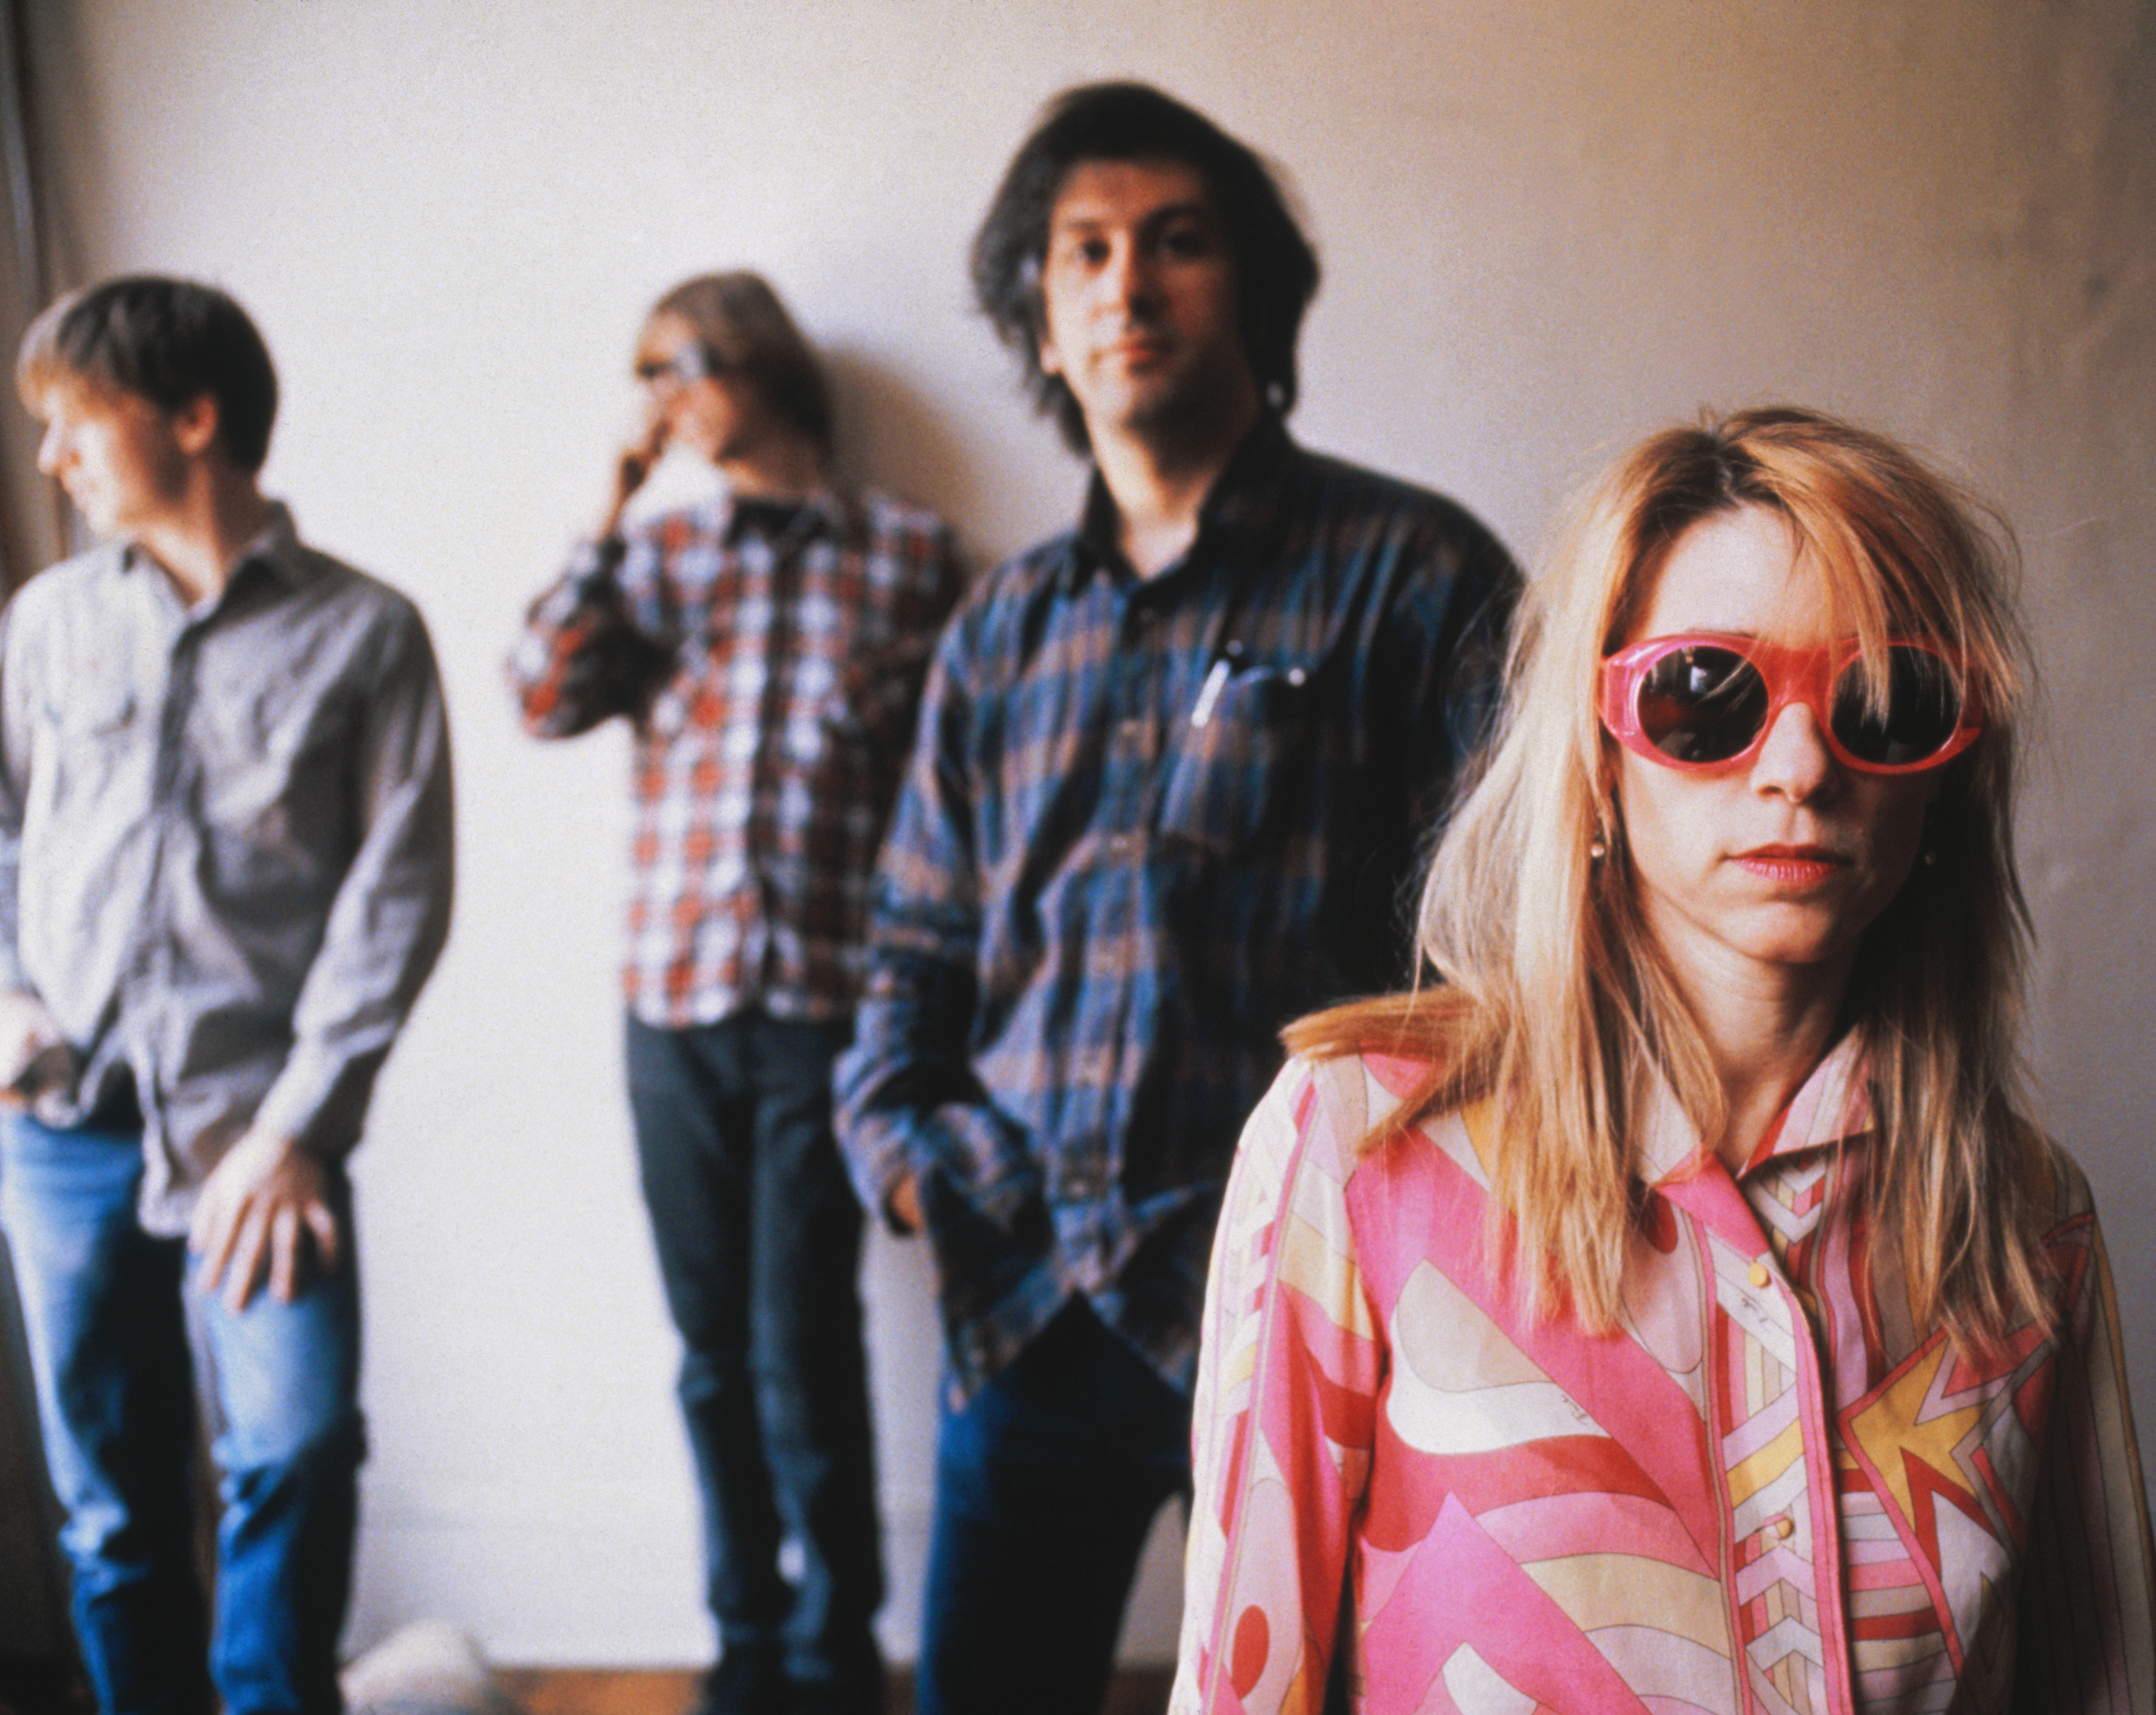 Don't Give Me Your Soul: The Oral History of Sonic Youth's <i></noscript>
<p><strong>THE STUDIO</strong></p>
<p><strong>Moore:</strong> God only knows what <em>Goo</em> would have sounded like if we did it in Wharton Tiers’ basement. That’s where we did <em>Confusion Is Sex</em> and <em>Kill Yr Idols</em>; maybe <em>Goo</em> would have come out the same way. All I know is that we did some demos for <em>Goo</em> that were more like eight-track demos, and there’s aspects of those that I find more interesting than what happens coming out of a 24-track board. I really liked the energy on those demos, because it sounded like the 24-track kind of spread things out a bit and it’s slightly more dissipating. It’s a learning process, the technology of it all. We were never a studio band in the sense of Pink Floyd or Steely Dan, where they were really utilizing every inch of it. We came to do that when we had our own studio, Echo Canyon, later on in the ’90s.</p>
<p><strong>Kim Gordon:</strong> We were excited. That was our first getting-out-of-the-basement-type recording situation. I mean, we did record at Sear Sound. But Sear Sound at the time was pretty lo-fi. But in a great way.</p>
<p><strong>Ranaldo:</strong> It was our first major-label record; we were second-guessing ourselves, like, is this mix good enough? This is pretty easy to do in the studio. And I’ve seen this happen to other bands from our scene that graduated to a major and got freaked out a little bit about making their first record. We weren’t sure the mixes with Nick Sansano were what we wanted, so we stopped working with him after a couple of sessions. We were desperate to try and finish this record, so the label brought in Ron St. Germain and we kind of referred to him as a console cowboy. He was a pilot at one point, I think, so he was really into all the tech stuff. And he did a really good job mixing it, though it was probably not mixed exactly the way we would have on our own.</p>
<p><strong>Moore:</strong> I remember the engineer telling us that we would be using the B-room, because Public Enemy were going to be doing their new sessions in the other room. When we found that out, we were like, ‘Where do we sign?’ This was the perfect situation because I was so huge into <em>It Takes a Nation of Millions to Hold Us Back</em>. When we started recording there, I had everybody involved with that record in the studio at the time, so I have the CD that has like 40 signatures on it with the entire crew of PE somewhere. Ice Cube had come by for one day and was hanging out right when N.W.A was hitting and he had to be in New York. I remember Chuck D calling him ‘Cubism’ and things like that.</p>
<p><strong>Shelley:</strong> We were recording at Greene Street Studios at the same time as Public Enemy, and Kim invited Chuck to say something on the middle eight of “Kool Thing.” But we would also spend time with Eric ‘Vietnam’ Sadler from the Bomb Squad, and he was really interested in what we were doing. Sometimes Flavor Flav would come by and sit with us for a bit and talk. But Eric seemed to be the most curious about what this band was doing with all these noisy guitars and everything.</p>
<p><strong>Moore:</strong> Vietnam would always pop in and see what we were up to. He was the one who asked Chuck about being on “Kool Thing,” and within minutes, Chuck just rambled in. We asked him if he wanted to hear the song first, but he was like, ‘Nah, that’s alright, I’ll just put on the headphones and just run it.’ It was super, man, he did it in just one take. He listened, heard Kim’s recitation in the middle and he just flowed with it freestyle and then boom, that was it. <strong><br />
</strong></p>
<p><strong>Gordon:</strong> Hip-hop was a really big part of downtown music in a way. It was a place where so many things would collide, whether it was like the tradition of jazz in New York City, and then hip-hop coming from uptown to downtown and then all the new classical music from like La Monte Young and Rhys Chatham. It was all kind of melding together. It felt like walking down a street in New York, just this constant bombardment of sounds.</p>
<img src=